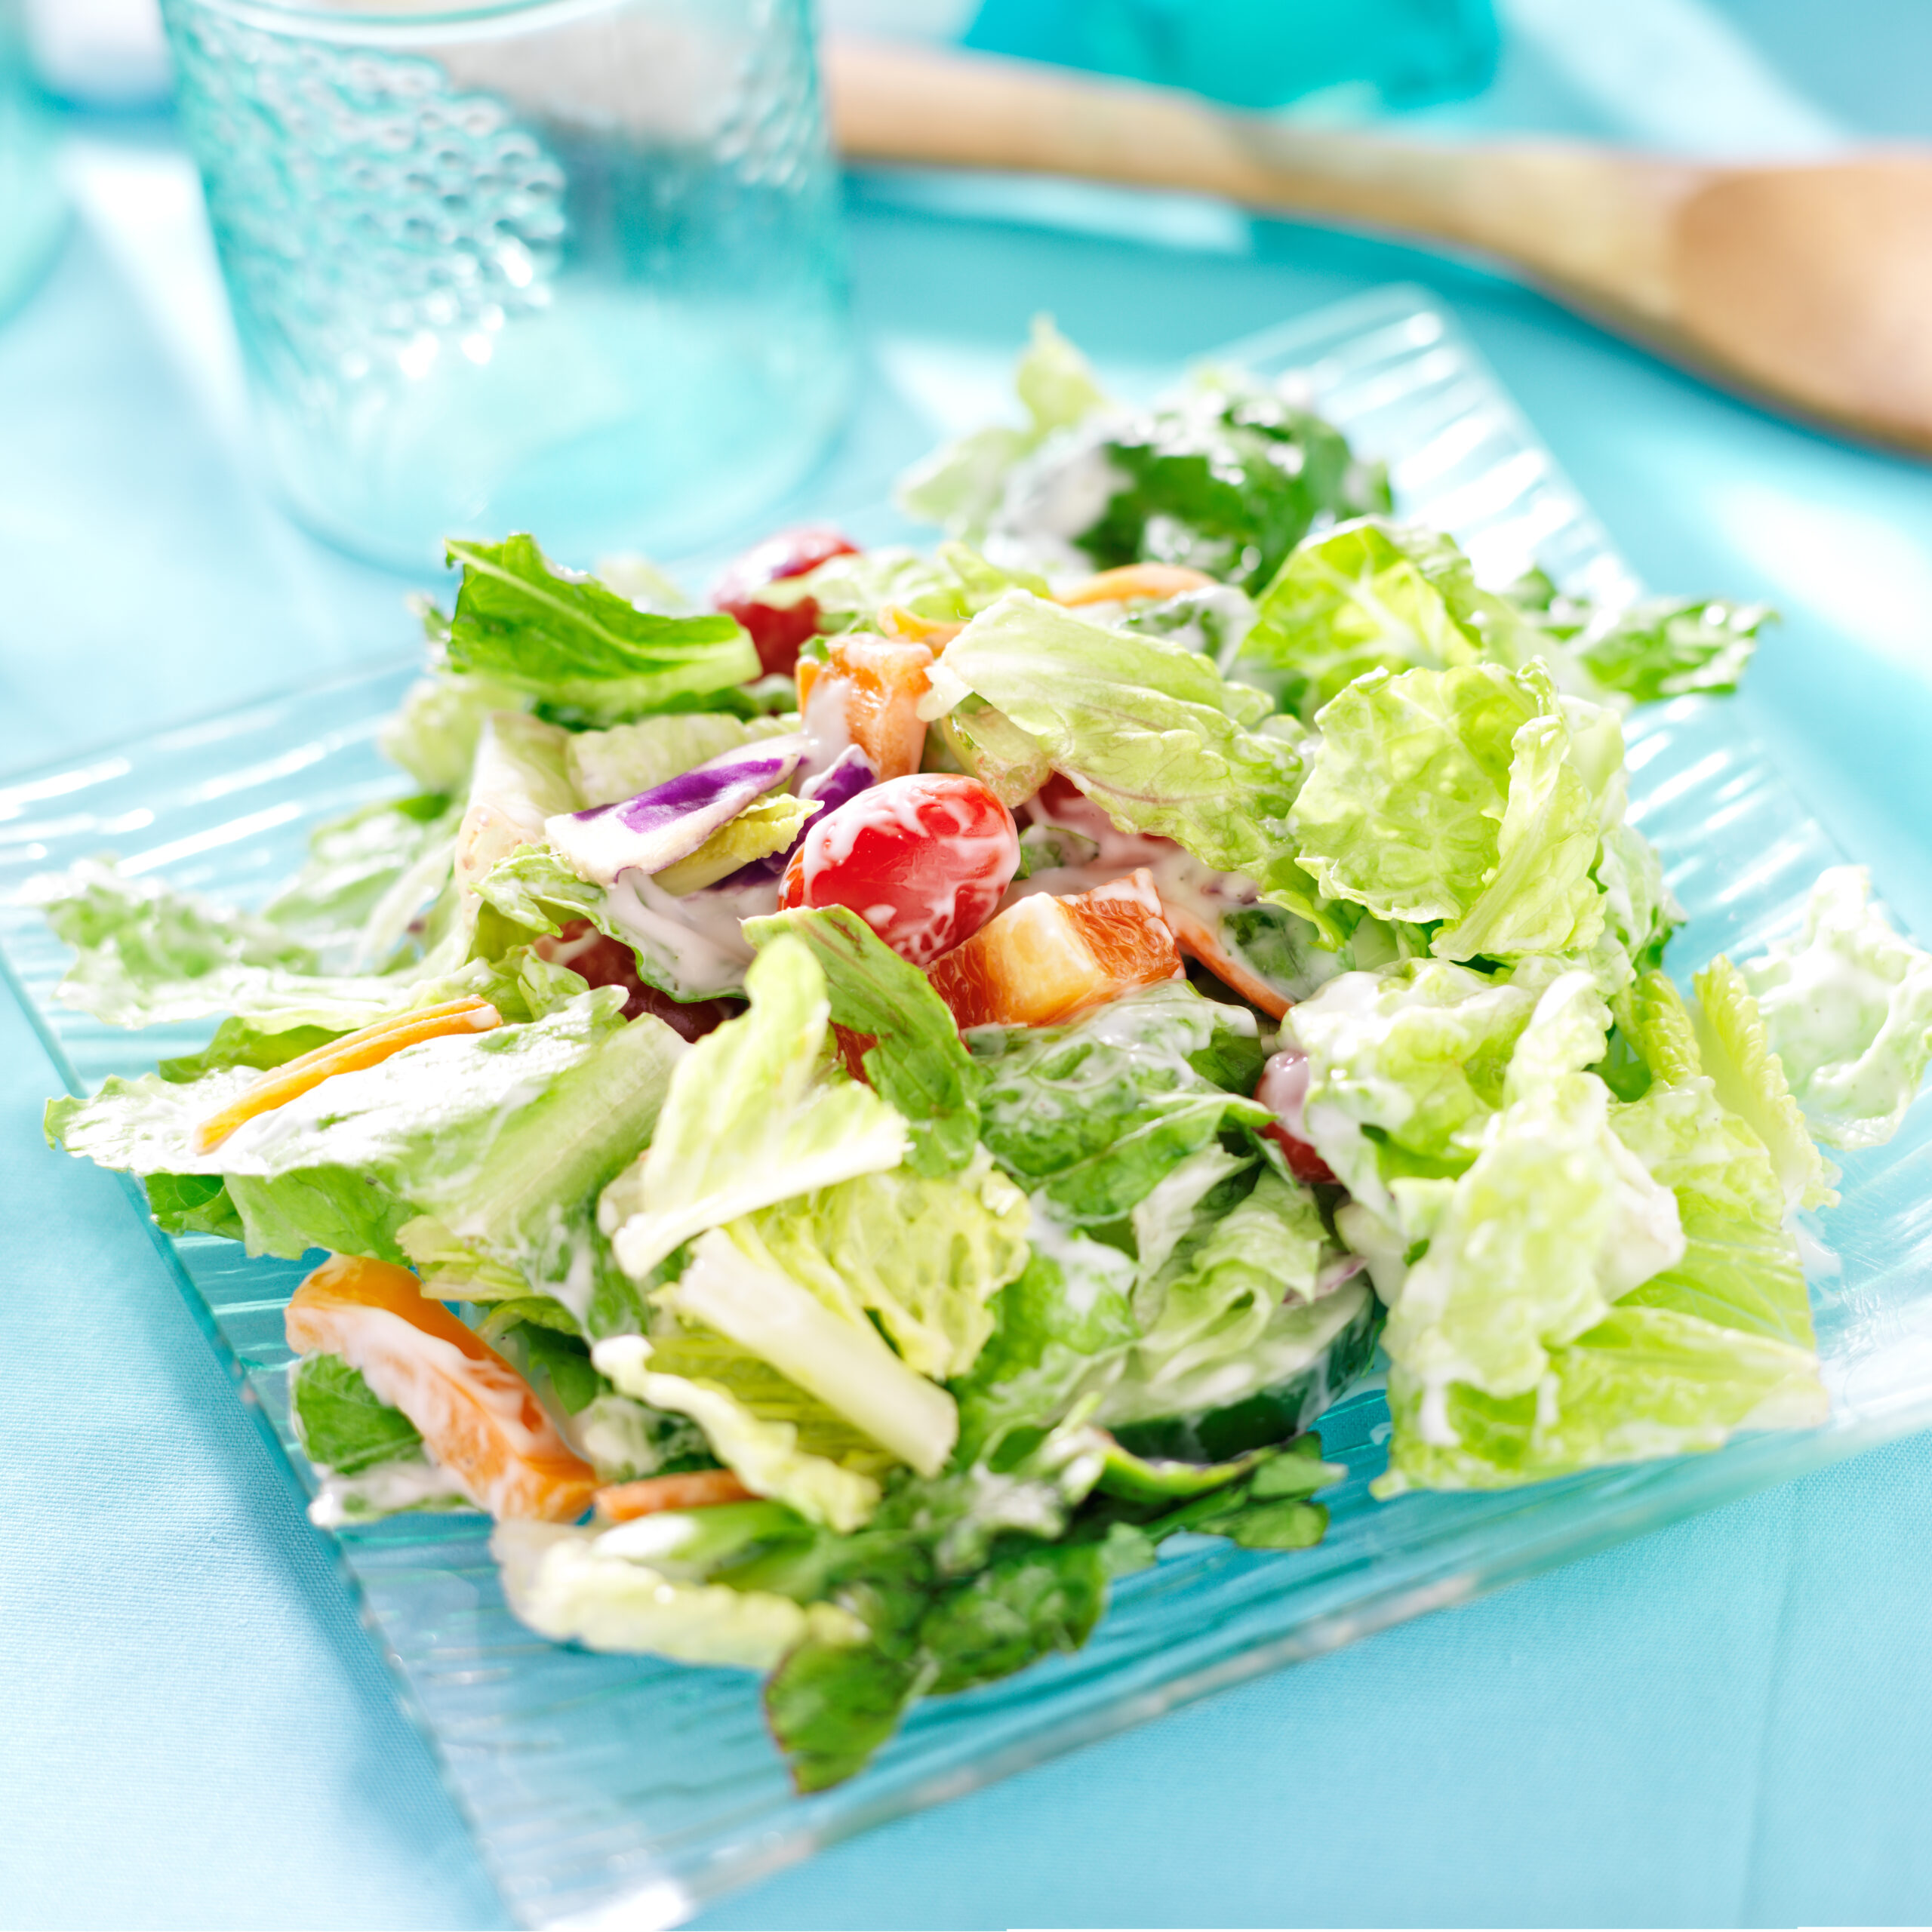 Garden,Salad,With,Fresh,Vegetables,And,Ranch,Dressing,On,Glass